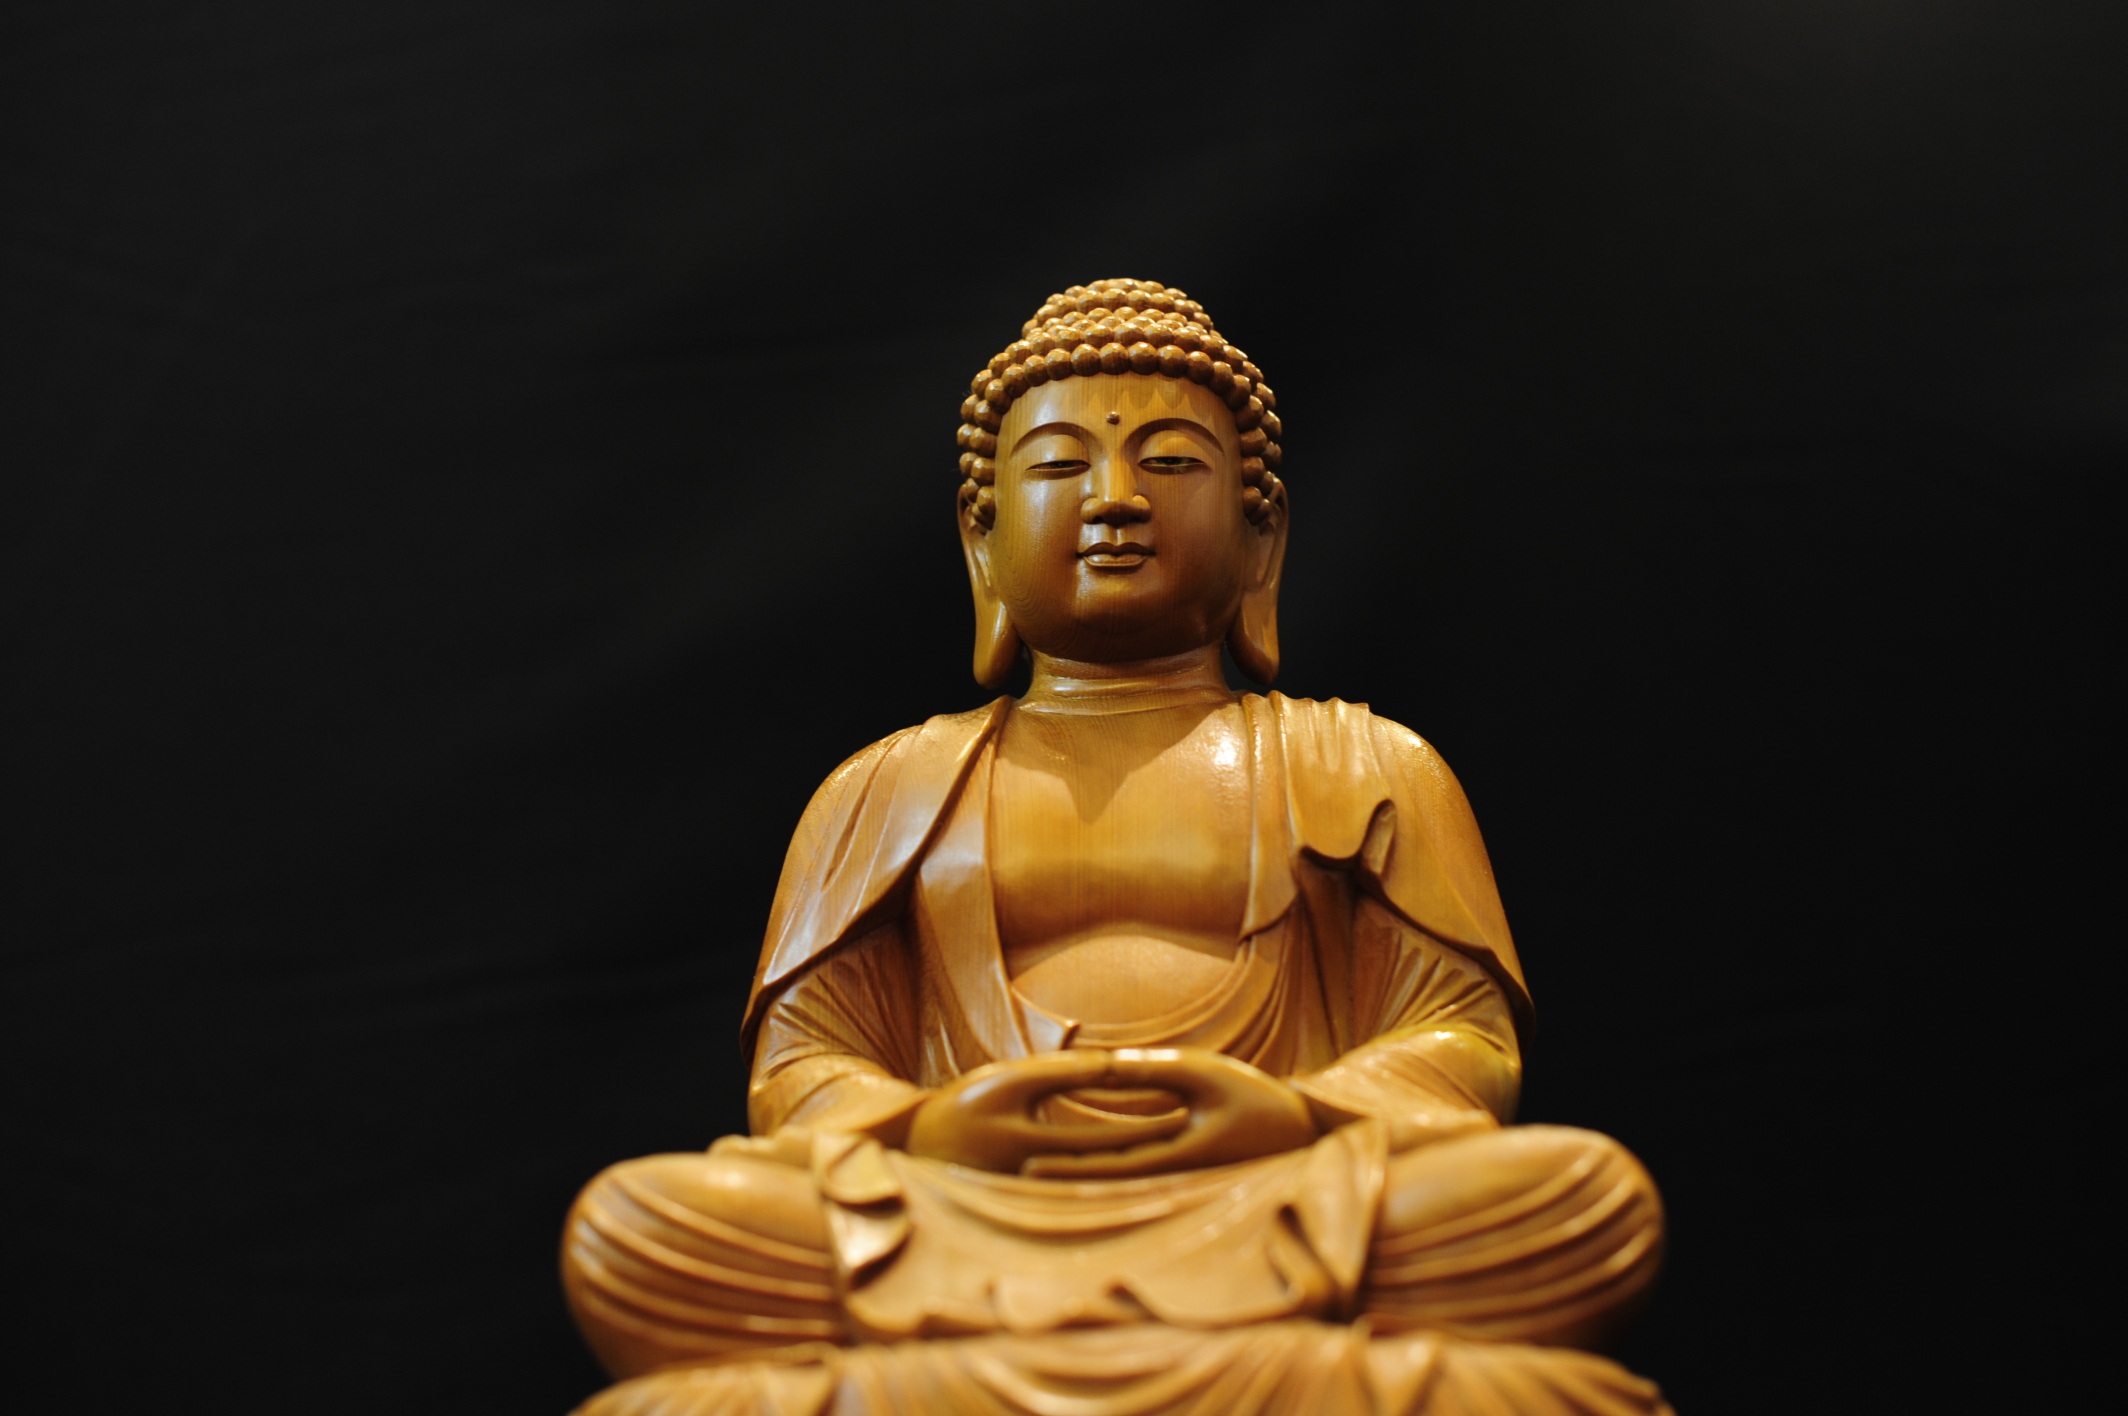 Statue of Buddha Wallpaper by susuteh